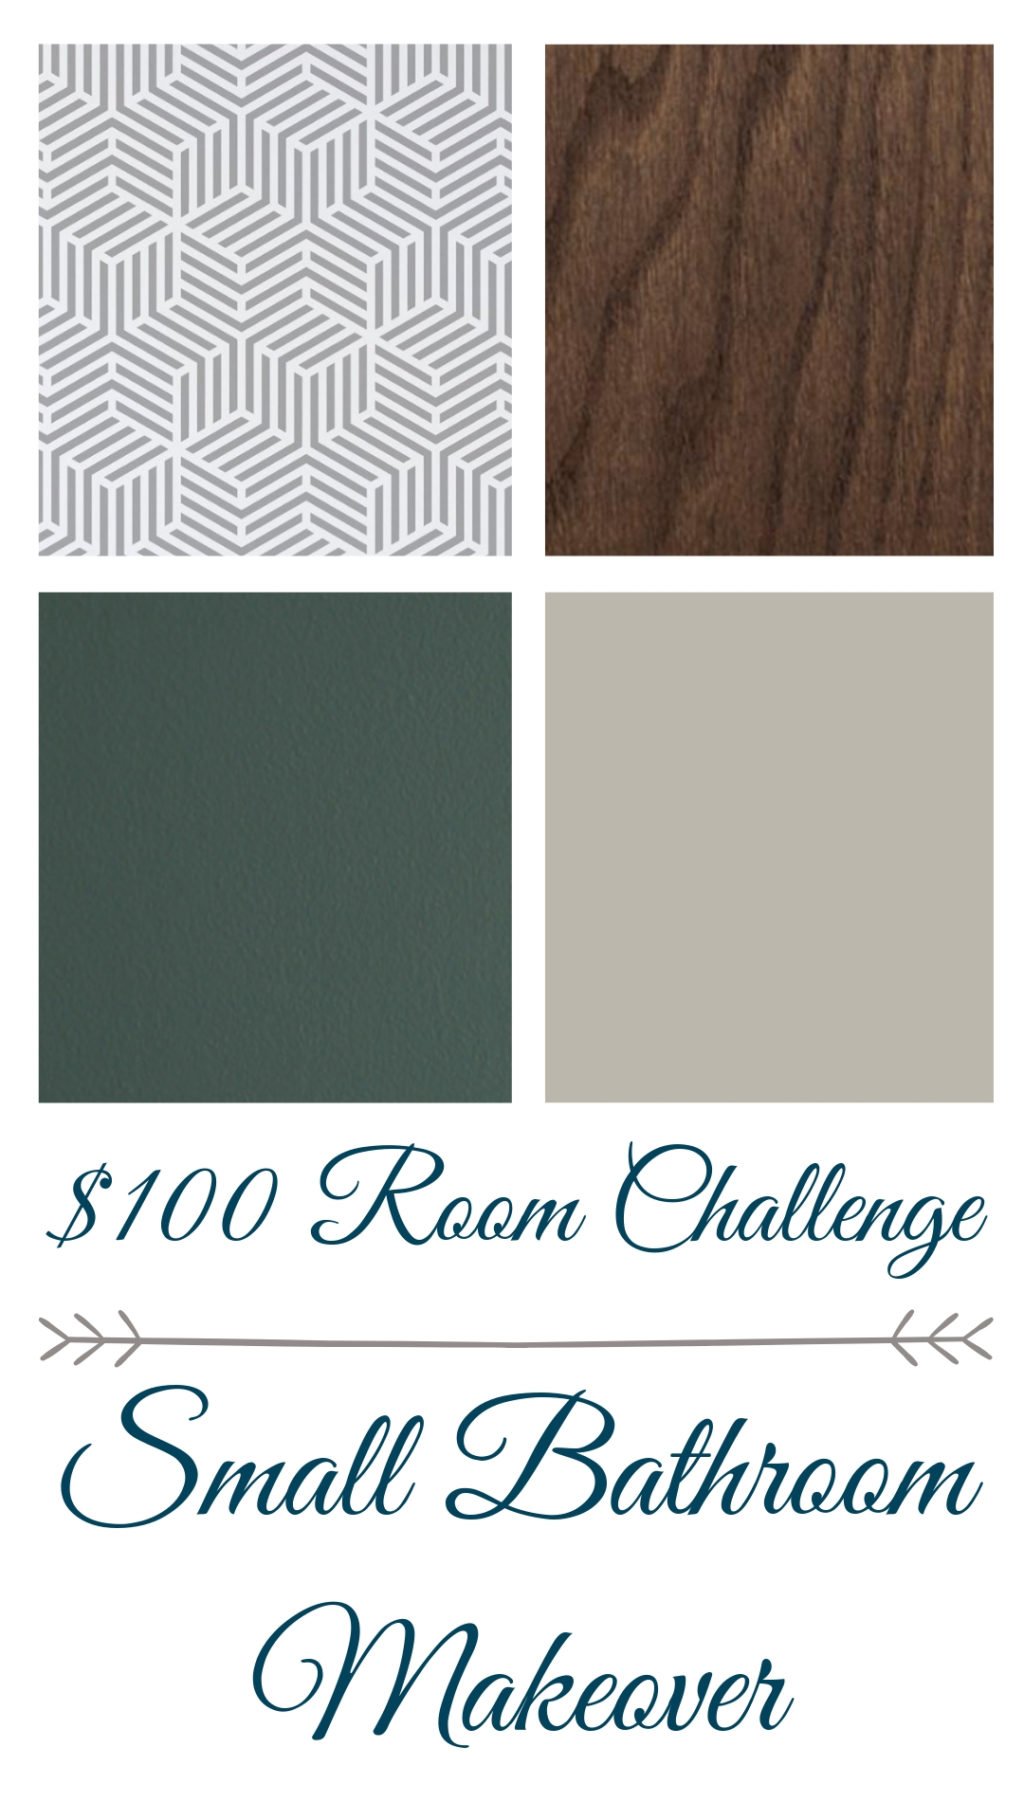 This small bathroom is in need of a serious makeover. $100 room challenge here I come! See how I transform this dated 90s bathroom into a modern beauty.